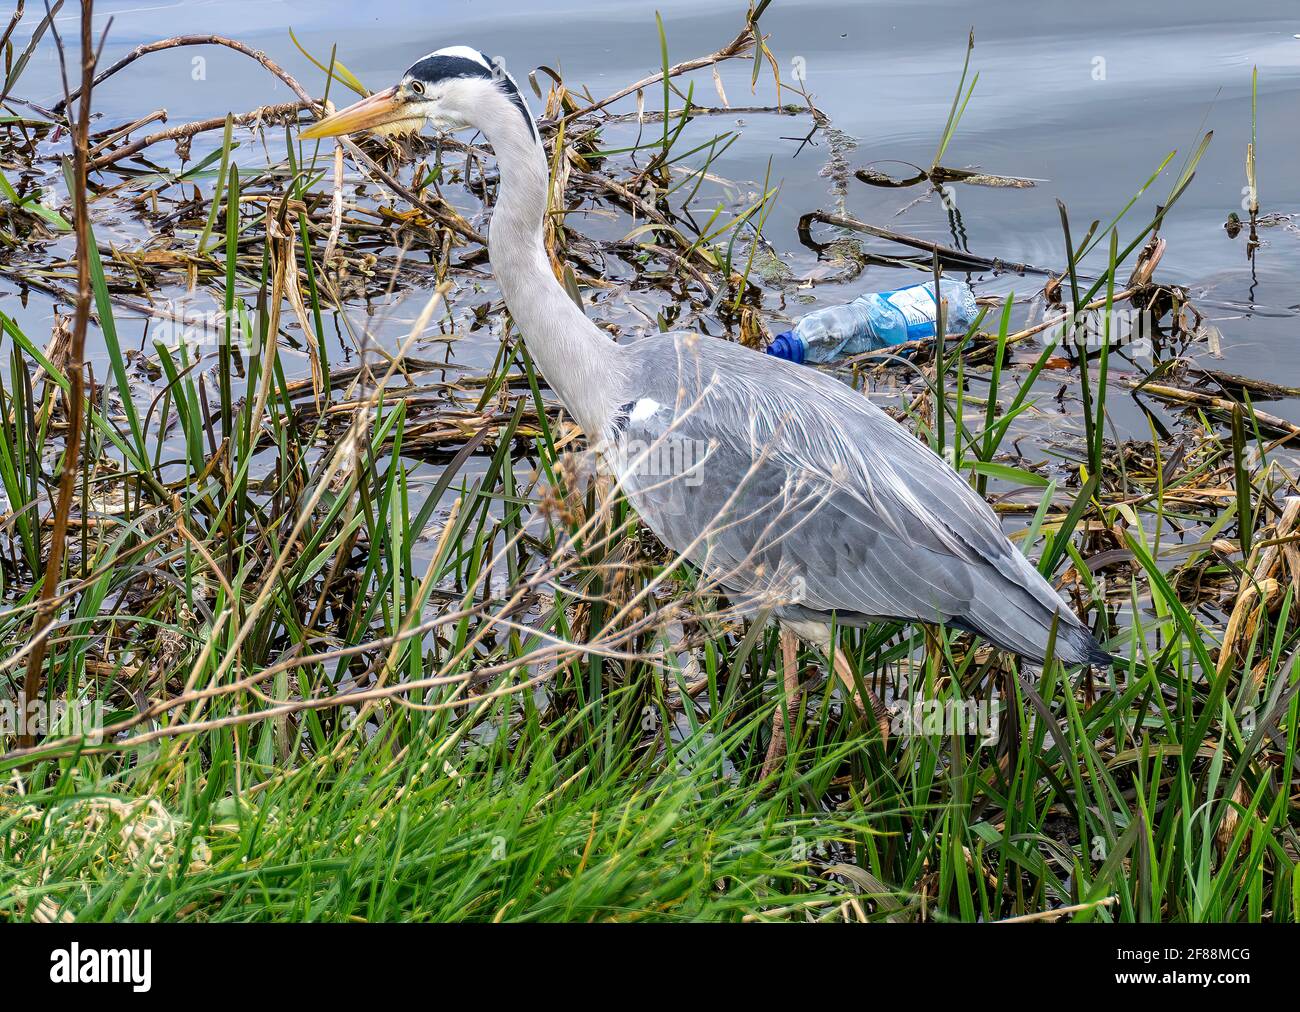 Heron. Close up of a heron stalking its prey among the reeds of the River Liffey in Dublin, Ireland with a plastic bottle for company. Stock Photo